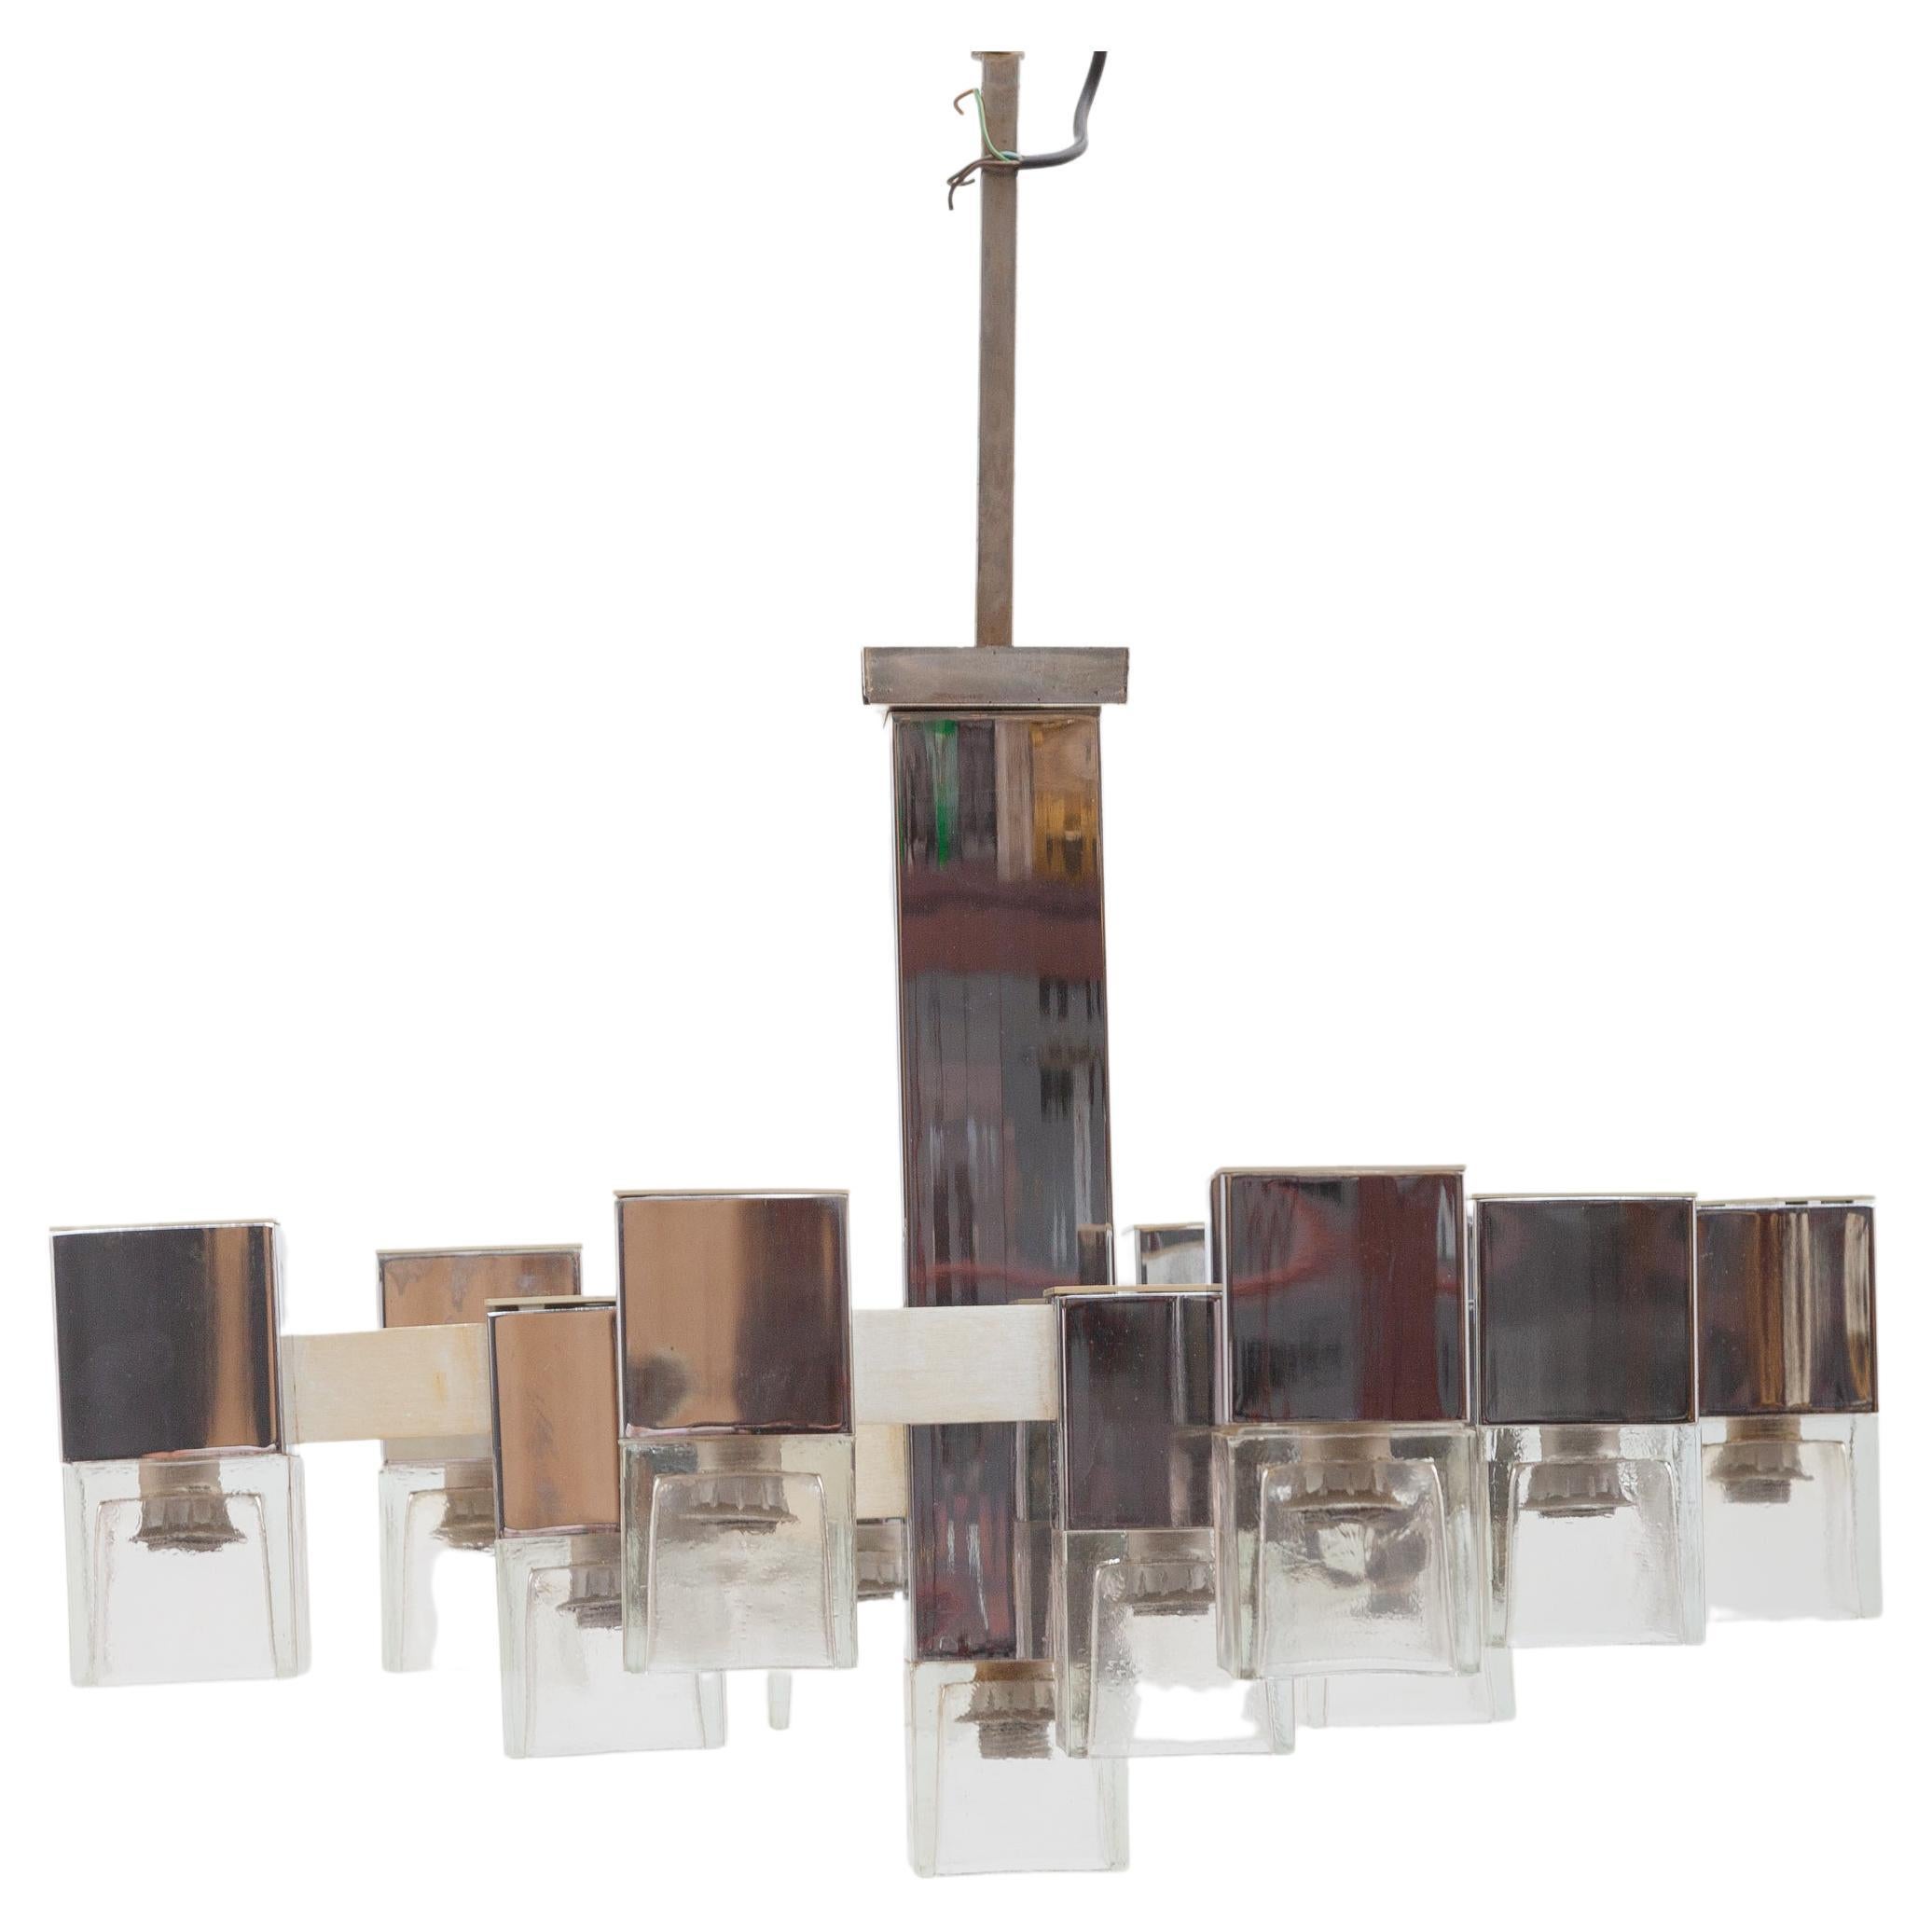 Cubic large hanging twelve bulbs chandelier designed by Gaetano Sciolari. The chandelier has a geometric chrome-finished steel body and frosted glass shades. The quality chrome frame consists of twelve polished chrome cubic rectangles attached by